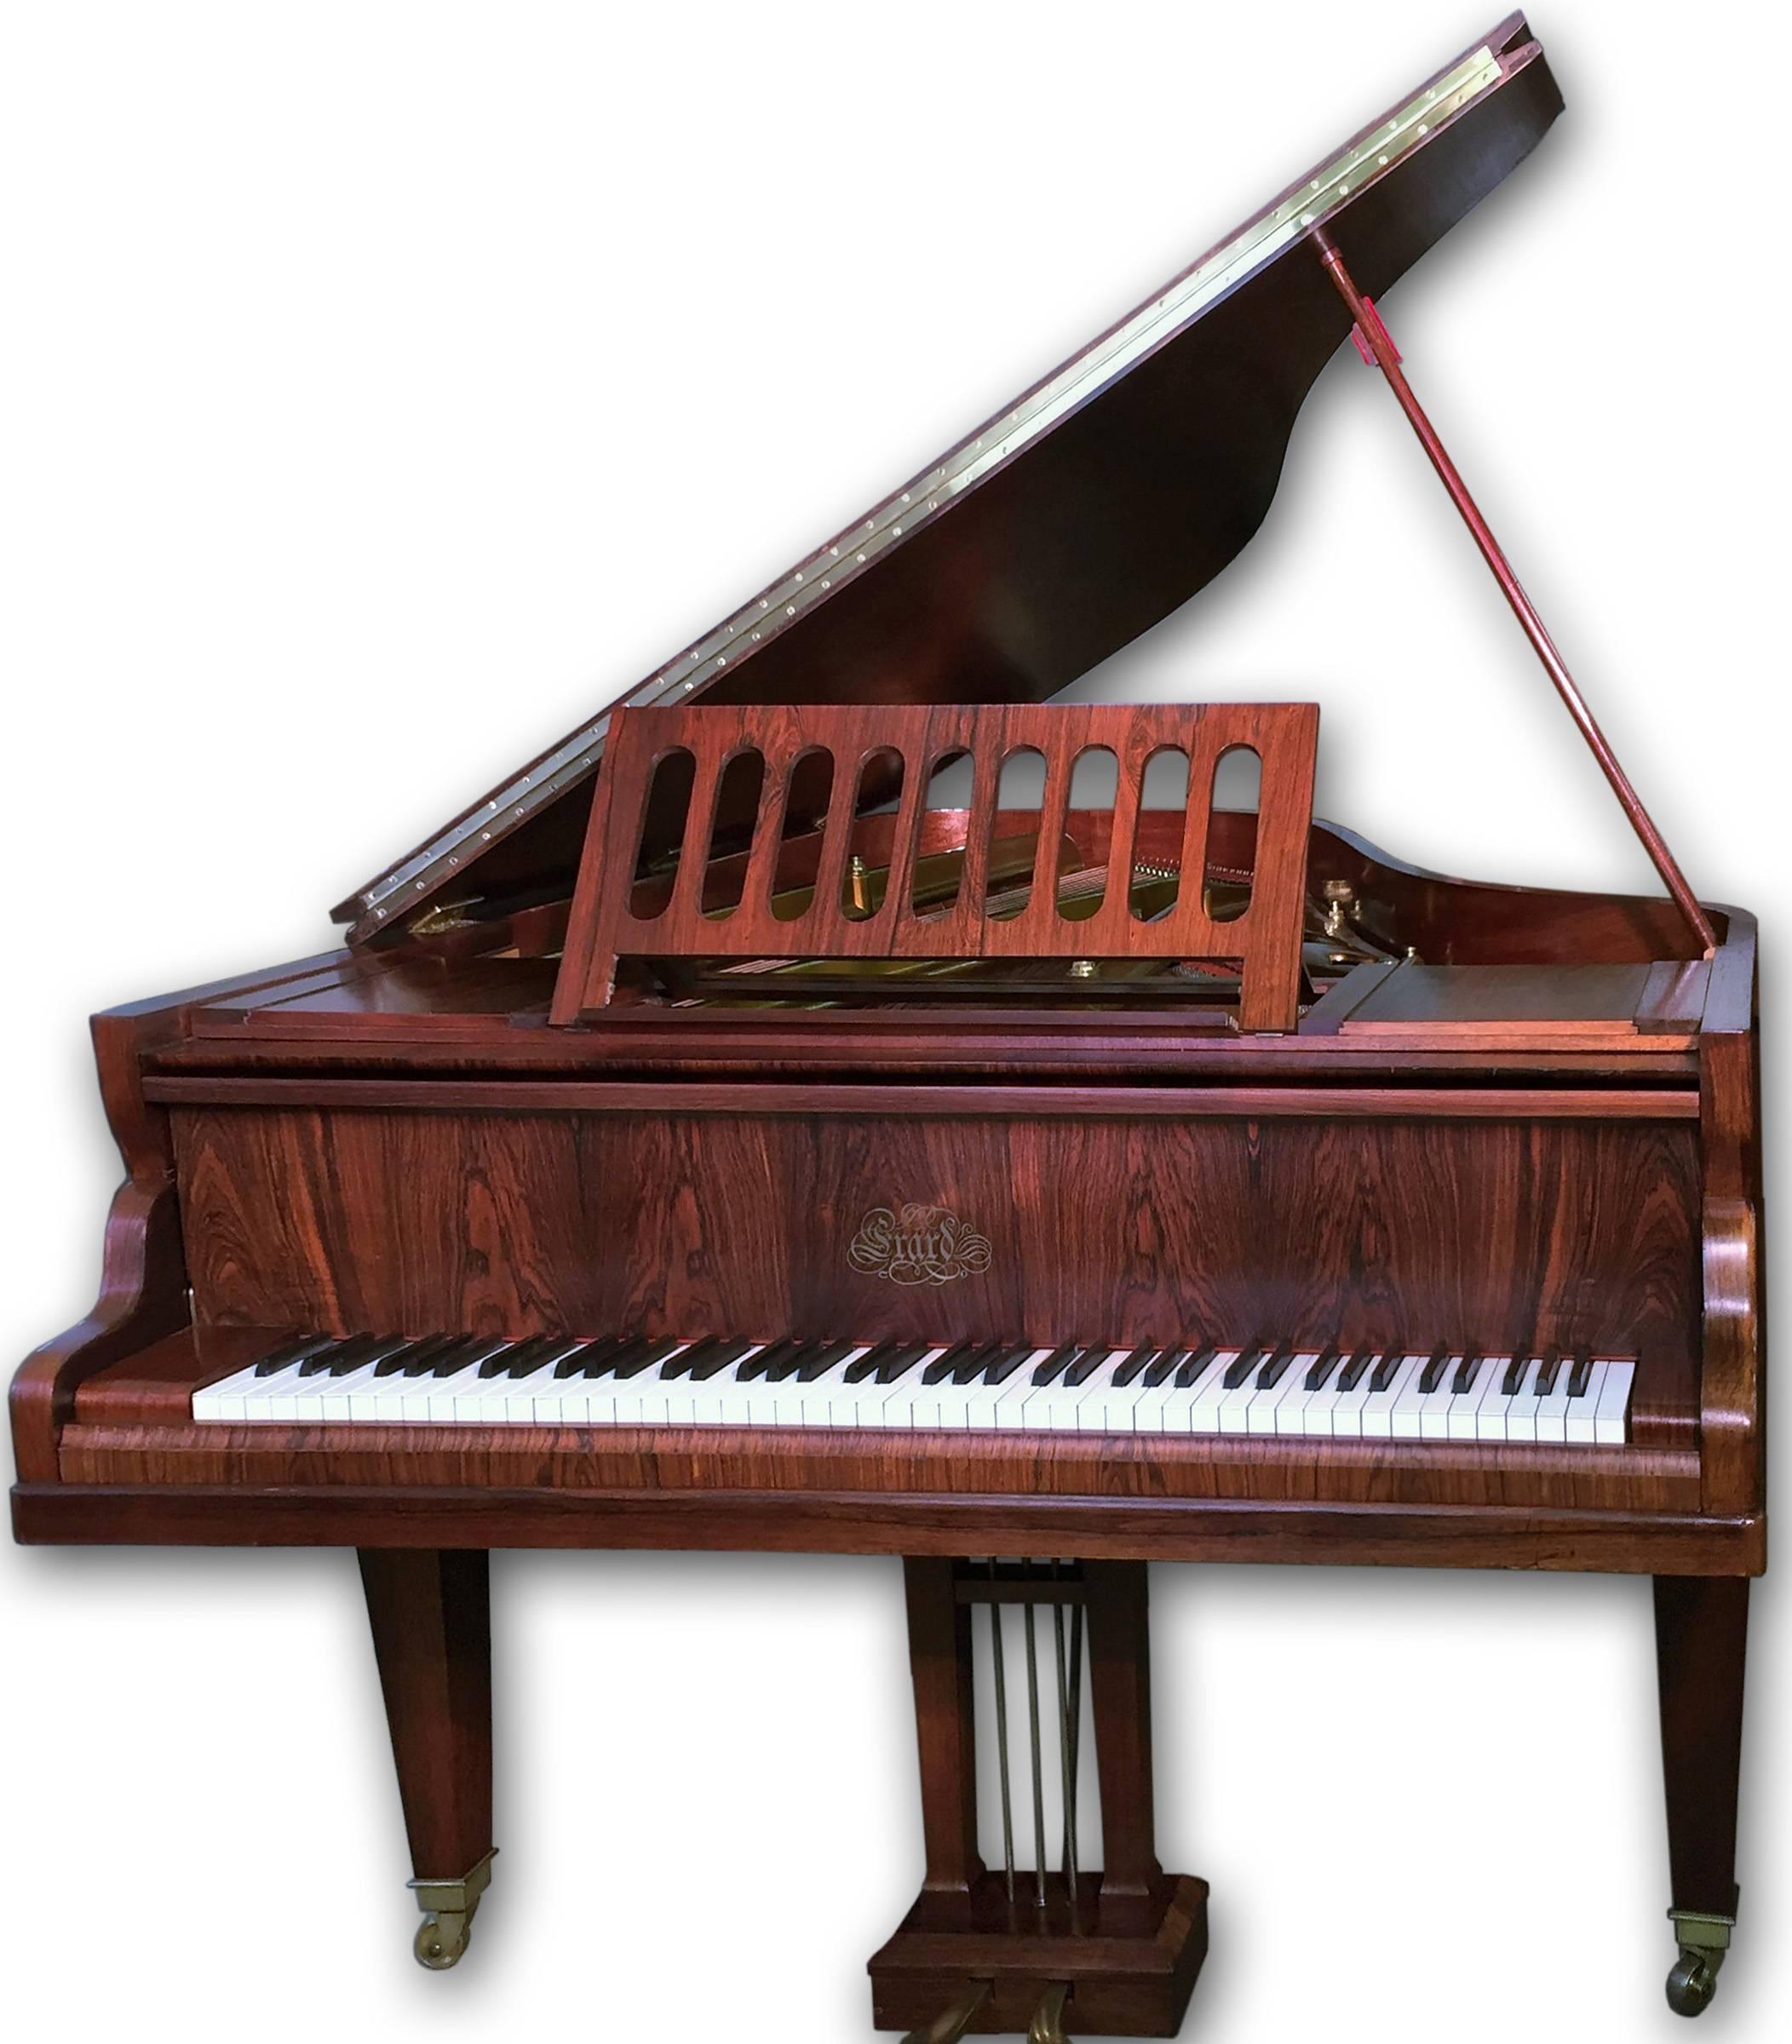 A grand piano Model no 1 made by Erard Paris, 1927.
The stunning case is made of rosewood with a newly restored satin hard oil finish.
The instrument has been newly revised and restored including a thorough regulation of the mechanics, taking care